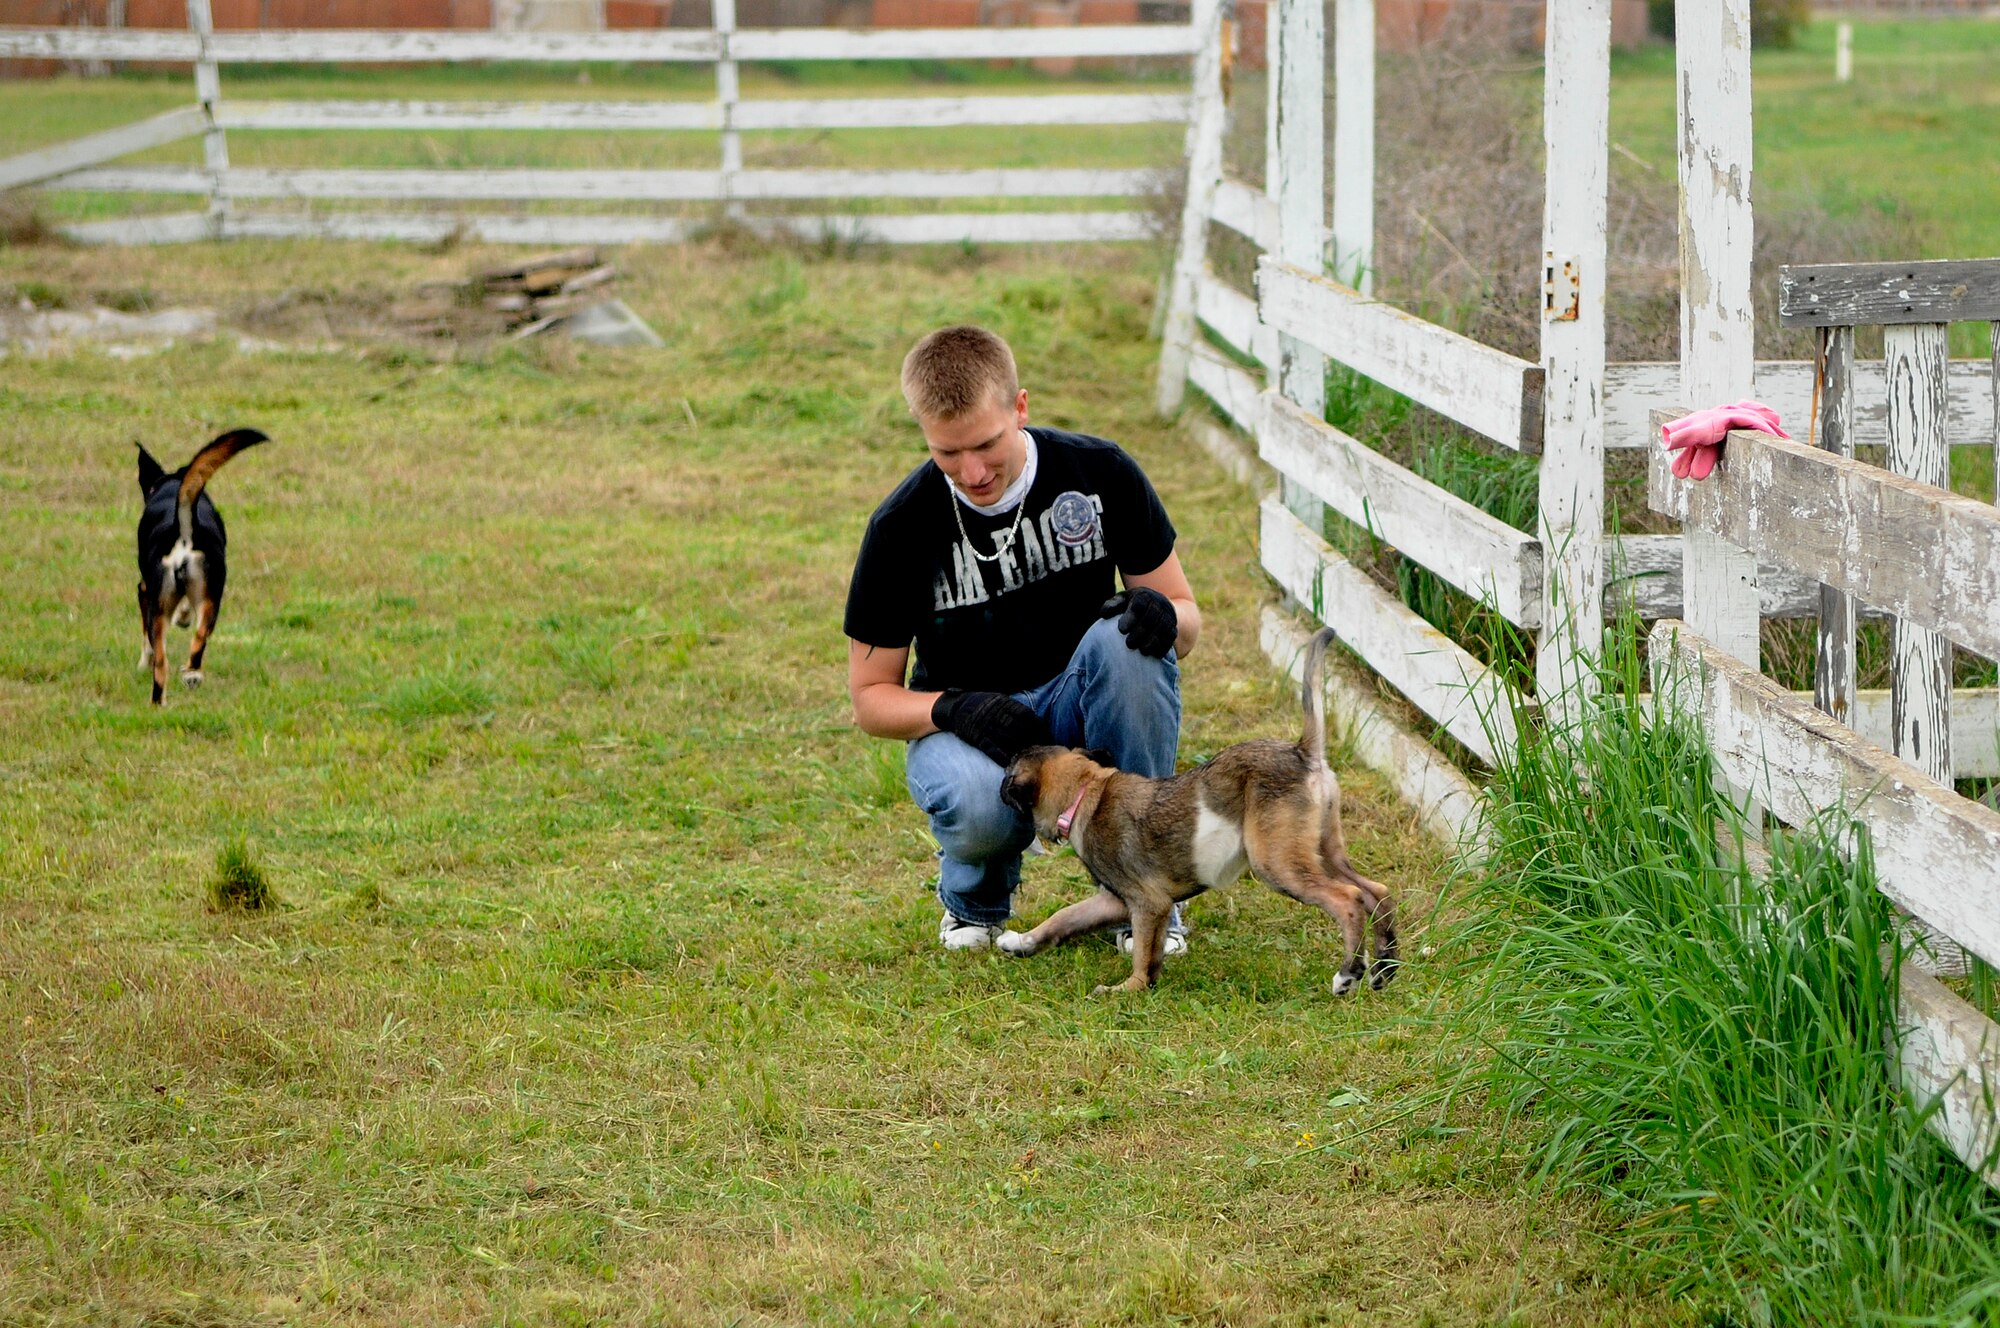 Senior Airman Christopher Tolczyk, 39th Logistics Readiness Squadron, takes a break from cleanup to play with his puppy at the base dog park April 21, 2012, at Incirlik Air Base, Turkey. Twelve volunteers spent five hours gathering trash and debris, mending fences, and mowing to provide a place for the base's furry residents to play. (U.S. Air Force photo by Staff Sgt. Kali L. Gradishar/Released)